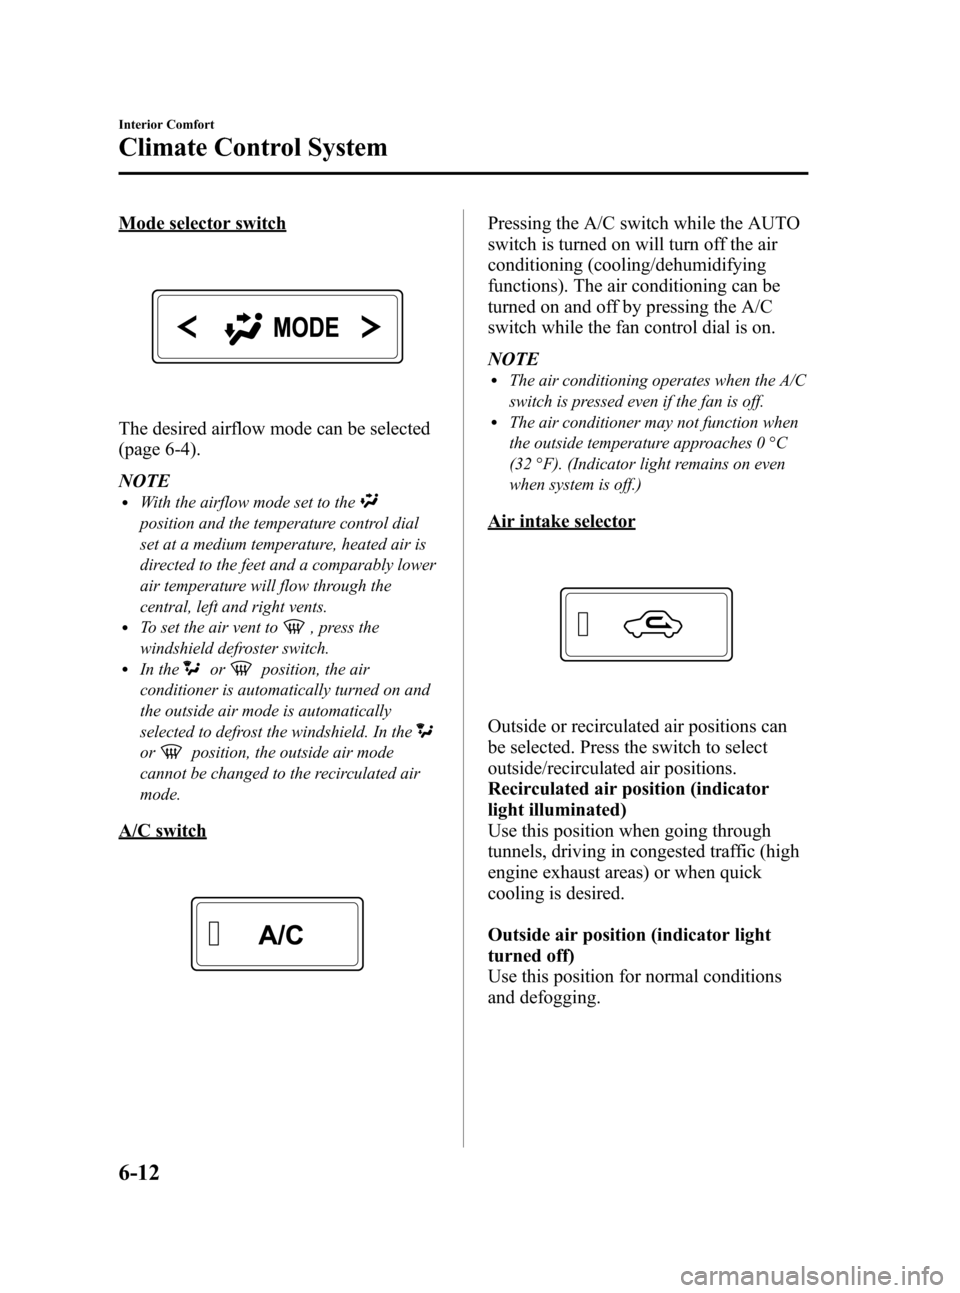 MAZDA MODEL 3 HATCHBACK 2012  Owners Manual (in English) Black plate (250,1)
Mode selector switch
The desired airflow mode can be selected
(page 6-4).
NOTE
lWith the airflow mode set to the
position and the temperature control dial
set at a medium temperatu